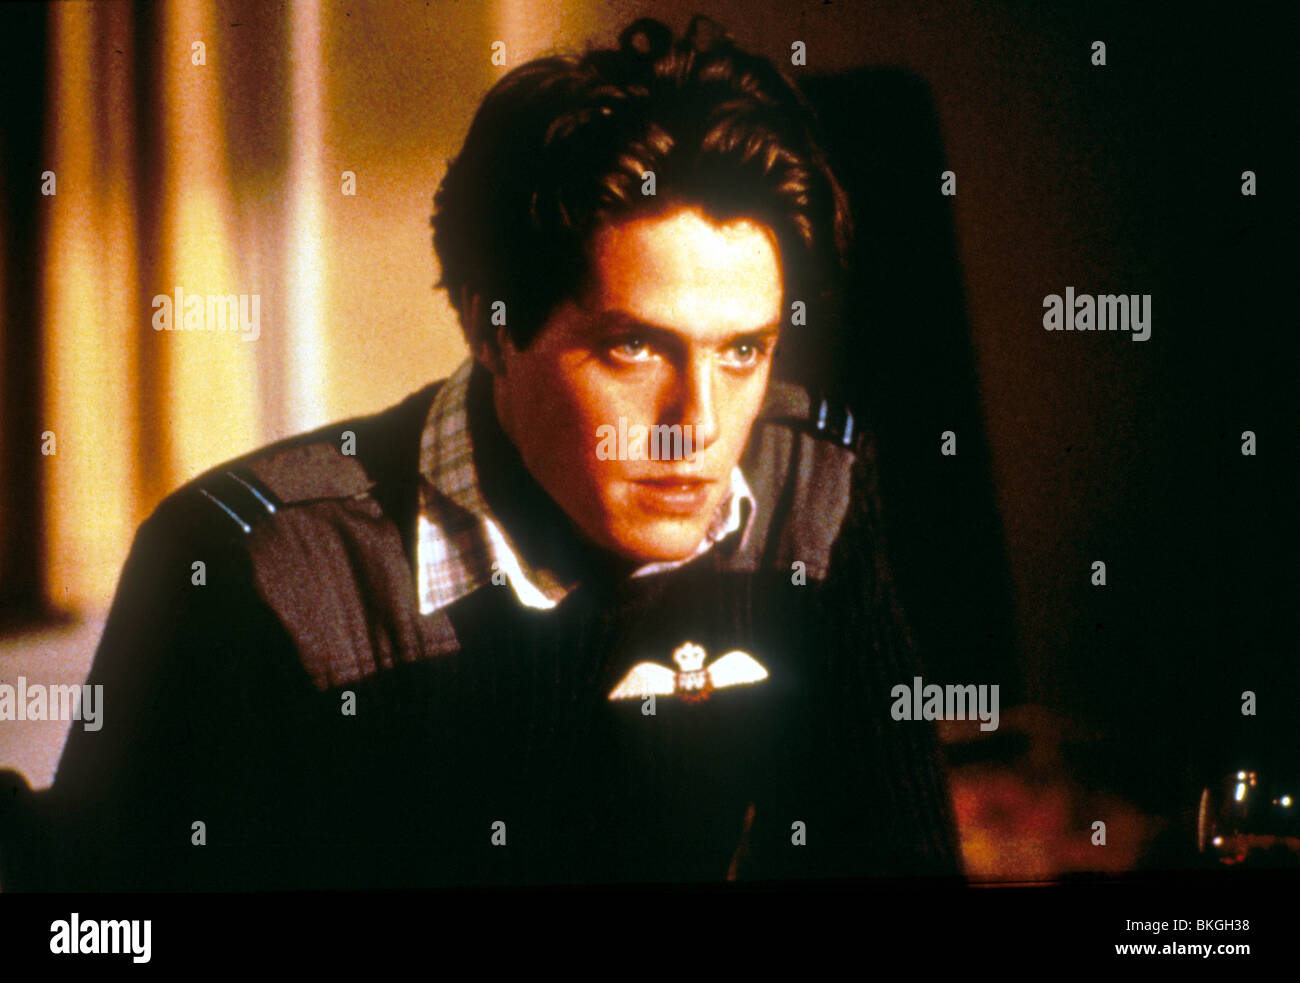 THE LAIR OF THE WHITE WORM (1988) HUGH GRANT LWW 003 Stock Photo